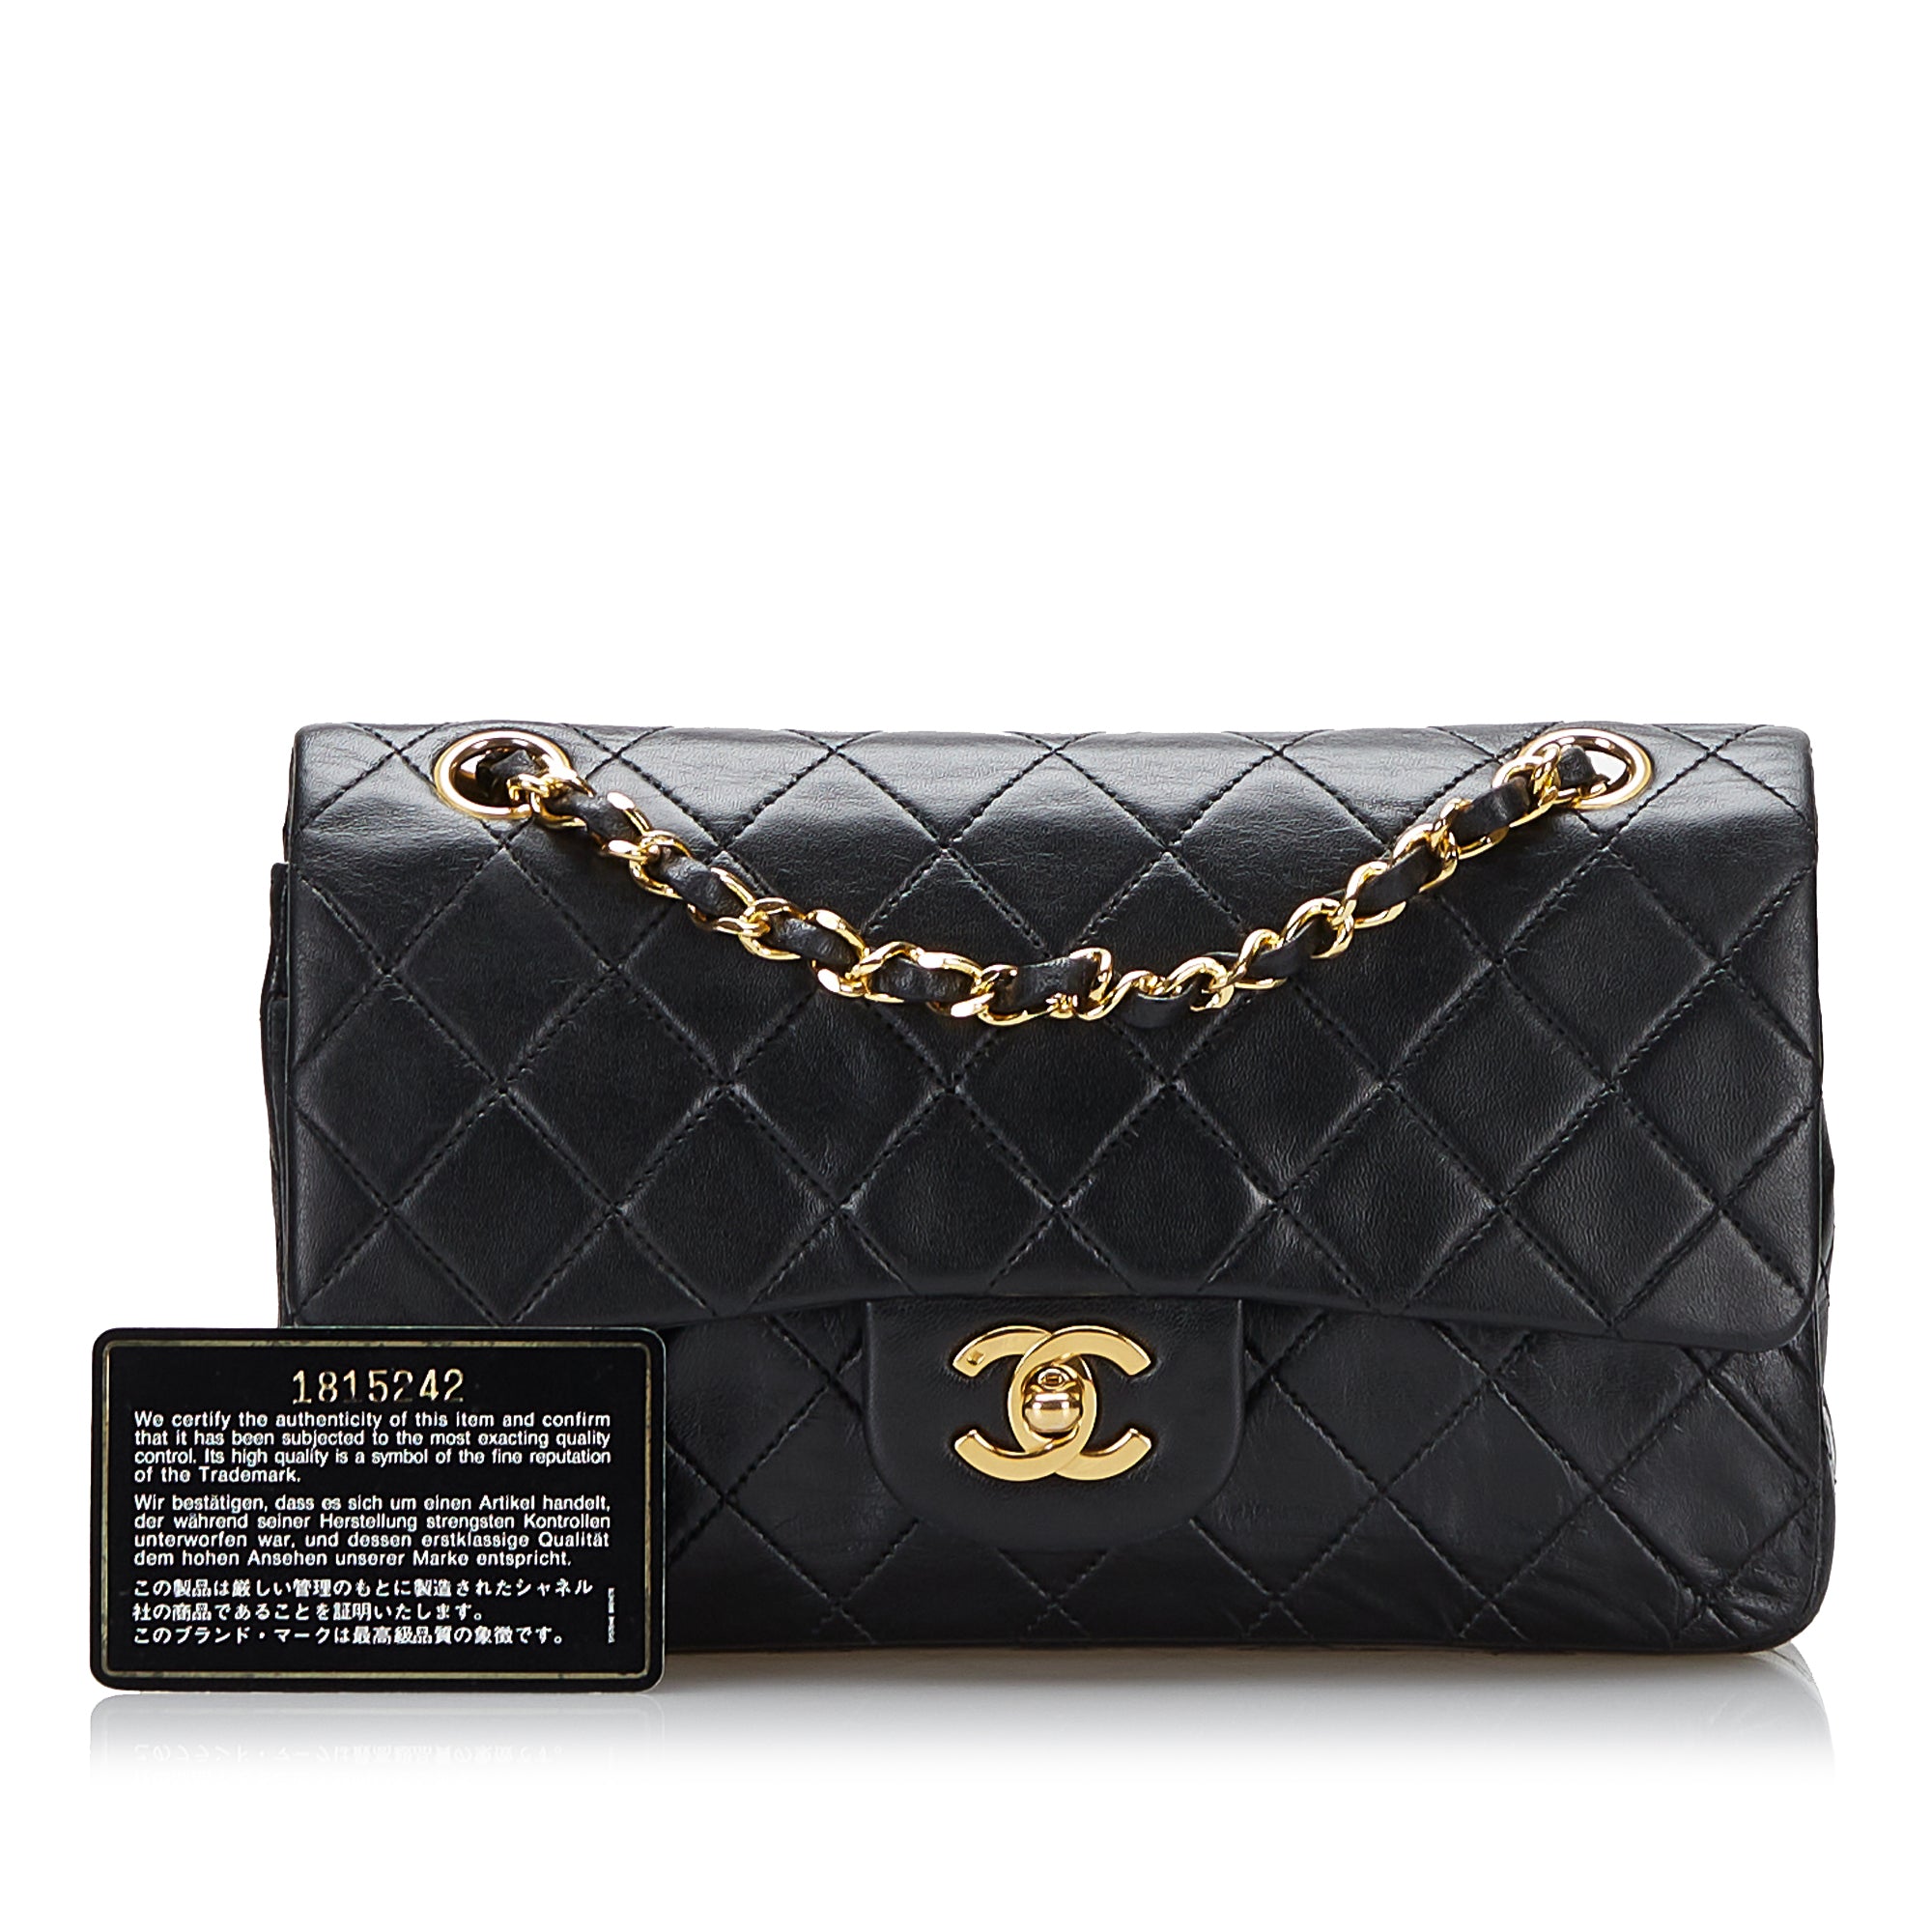 Chanel Vintage with Resin Woven Chain and Lock Black Lambskin Tote Bag